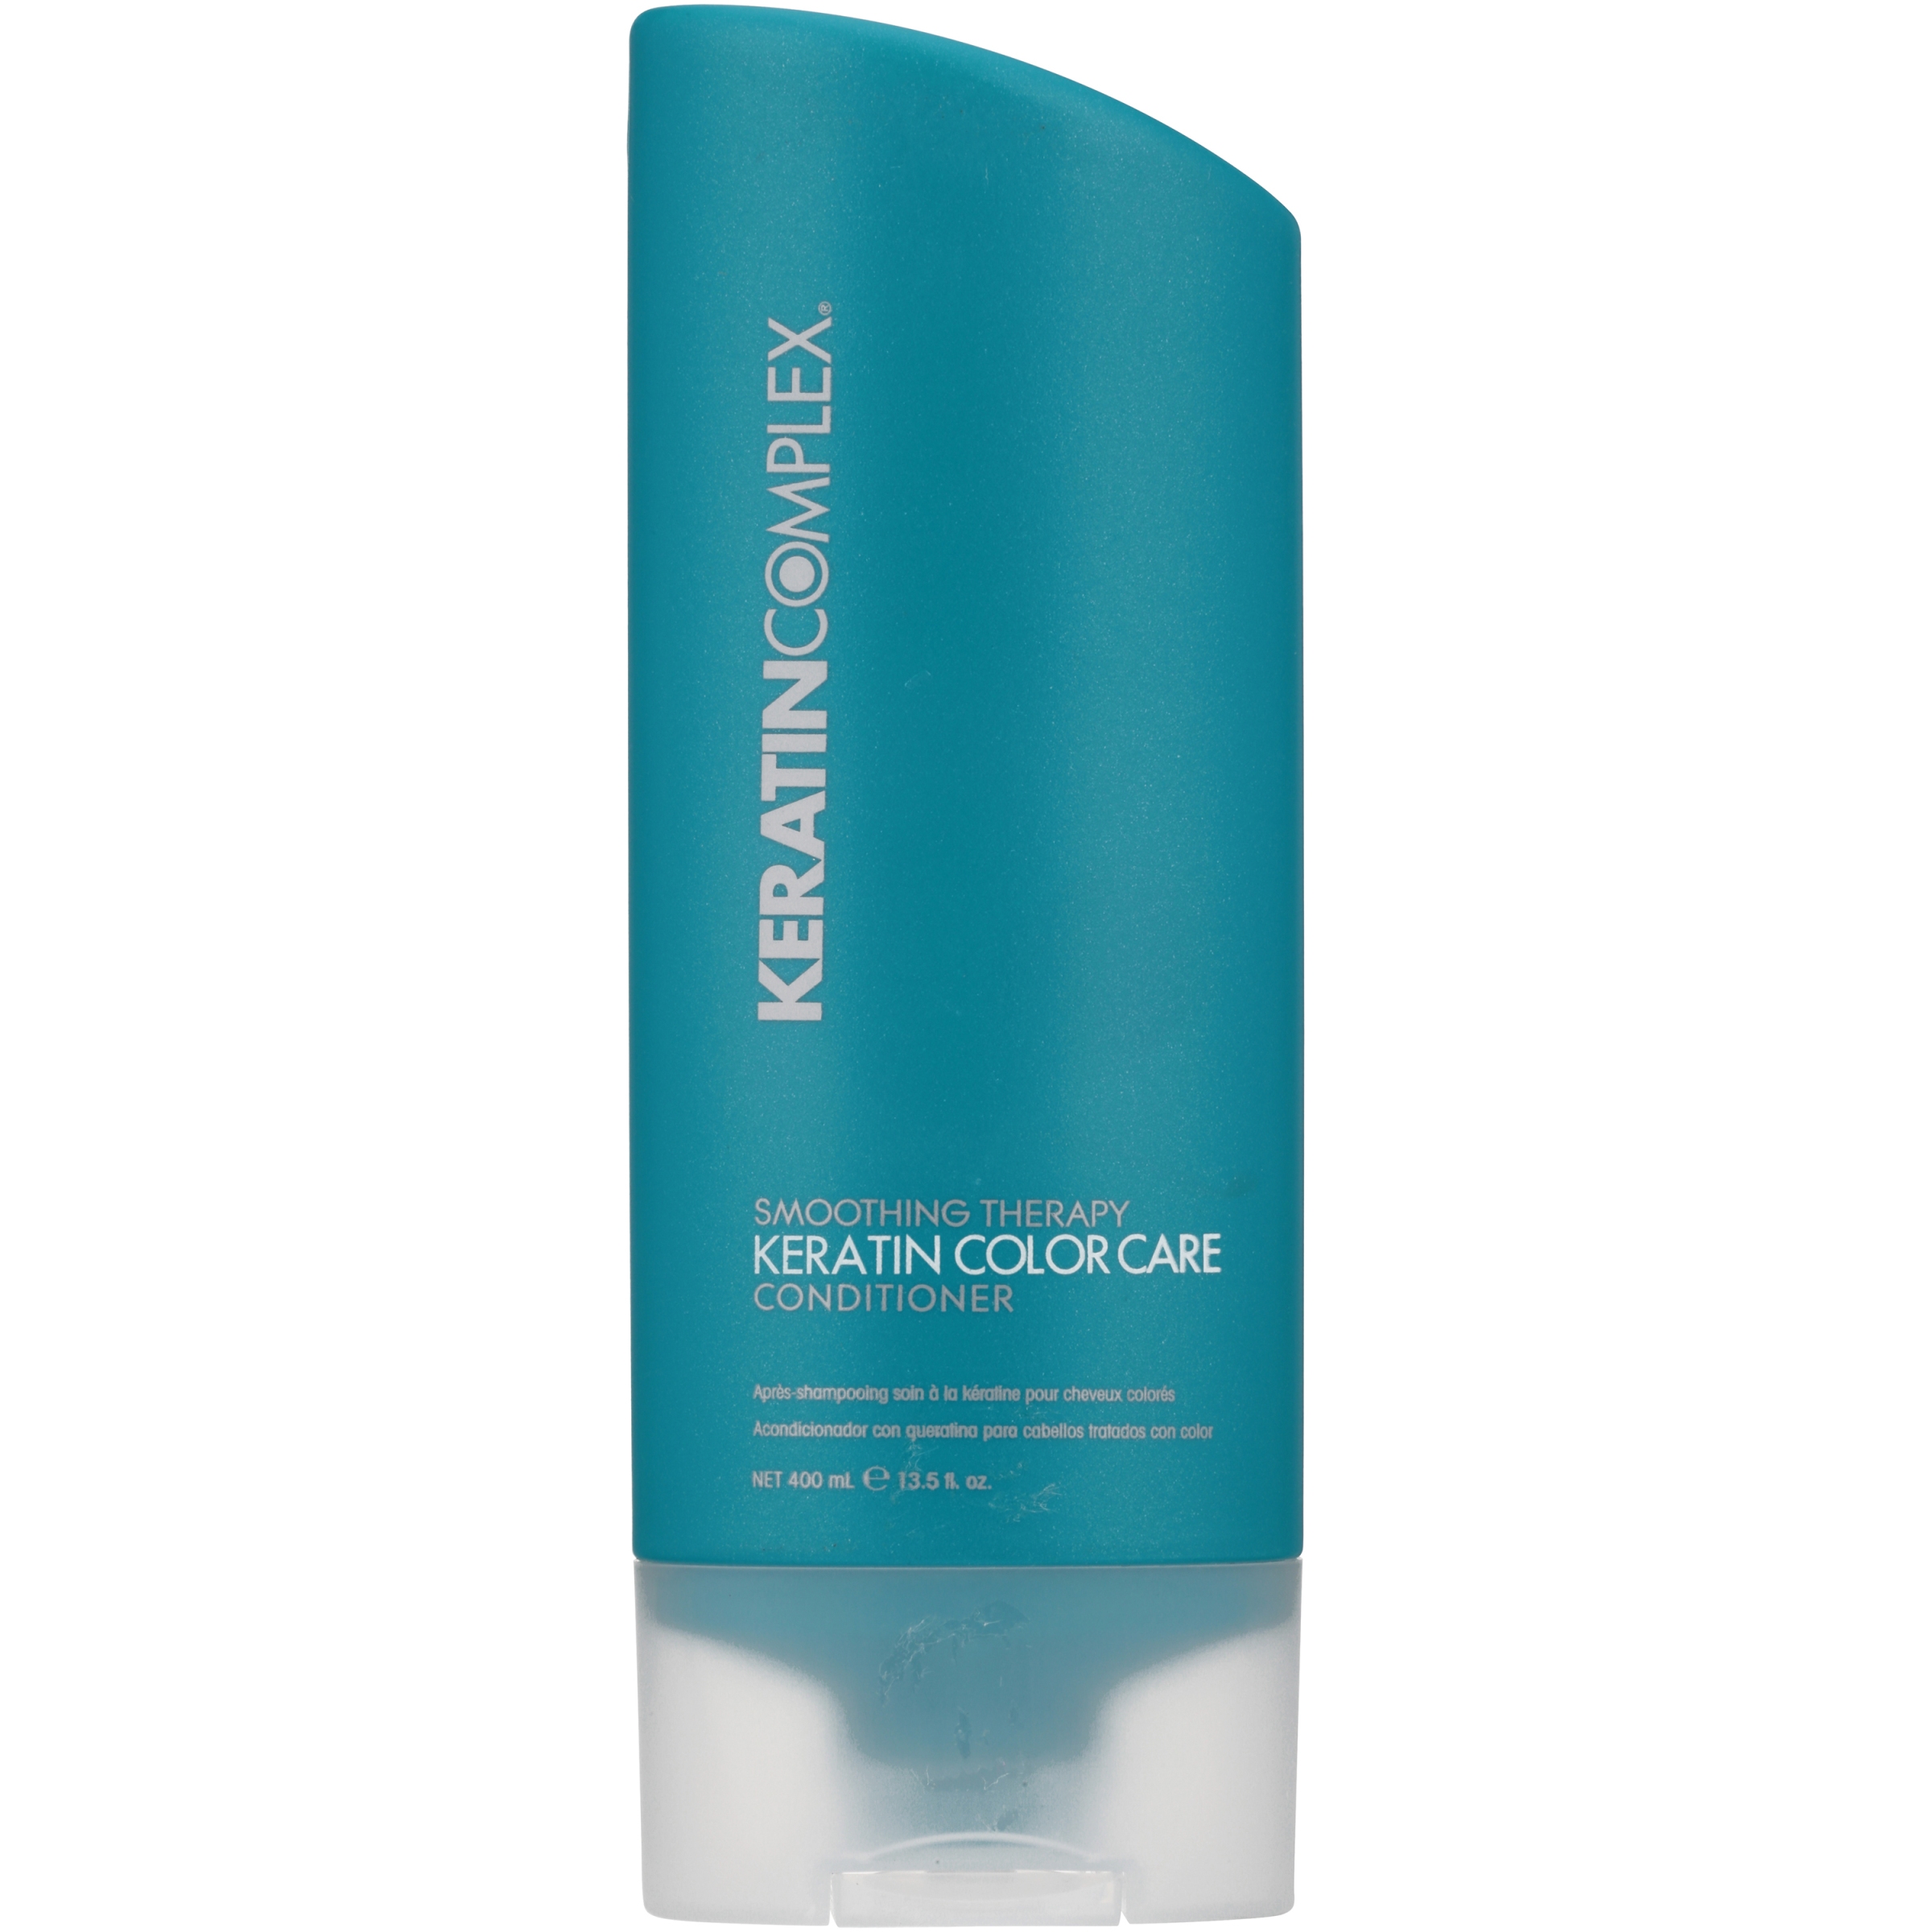 Keratin Complex Keratin Color Care Smoothing Therapy Conditioner - image 2 of 5